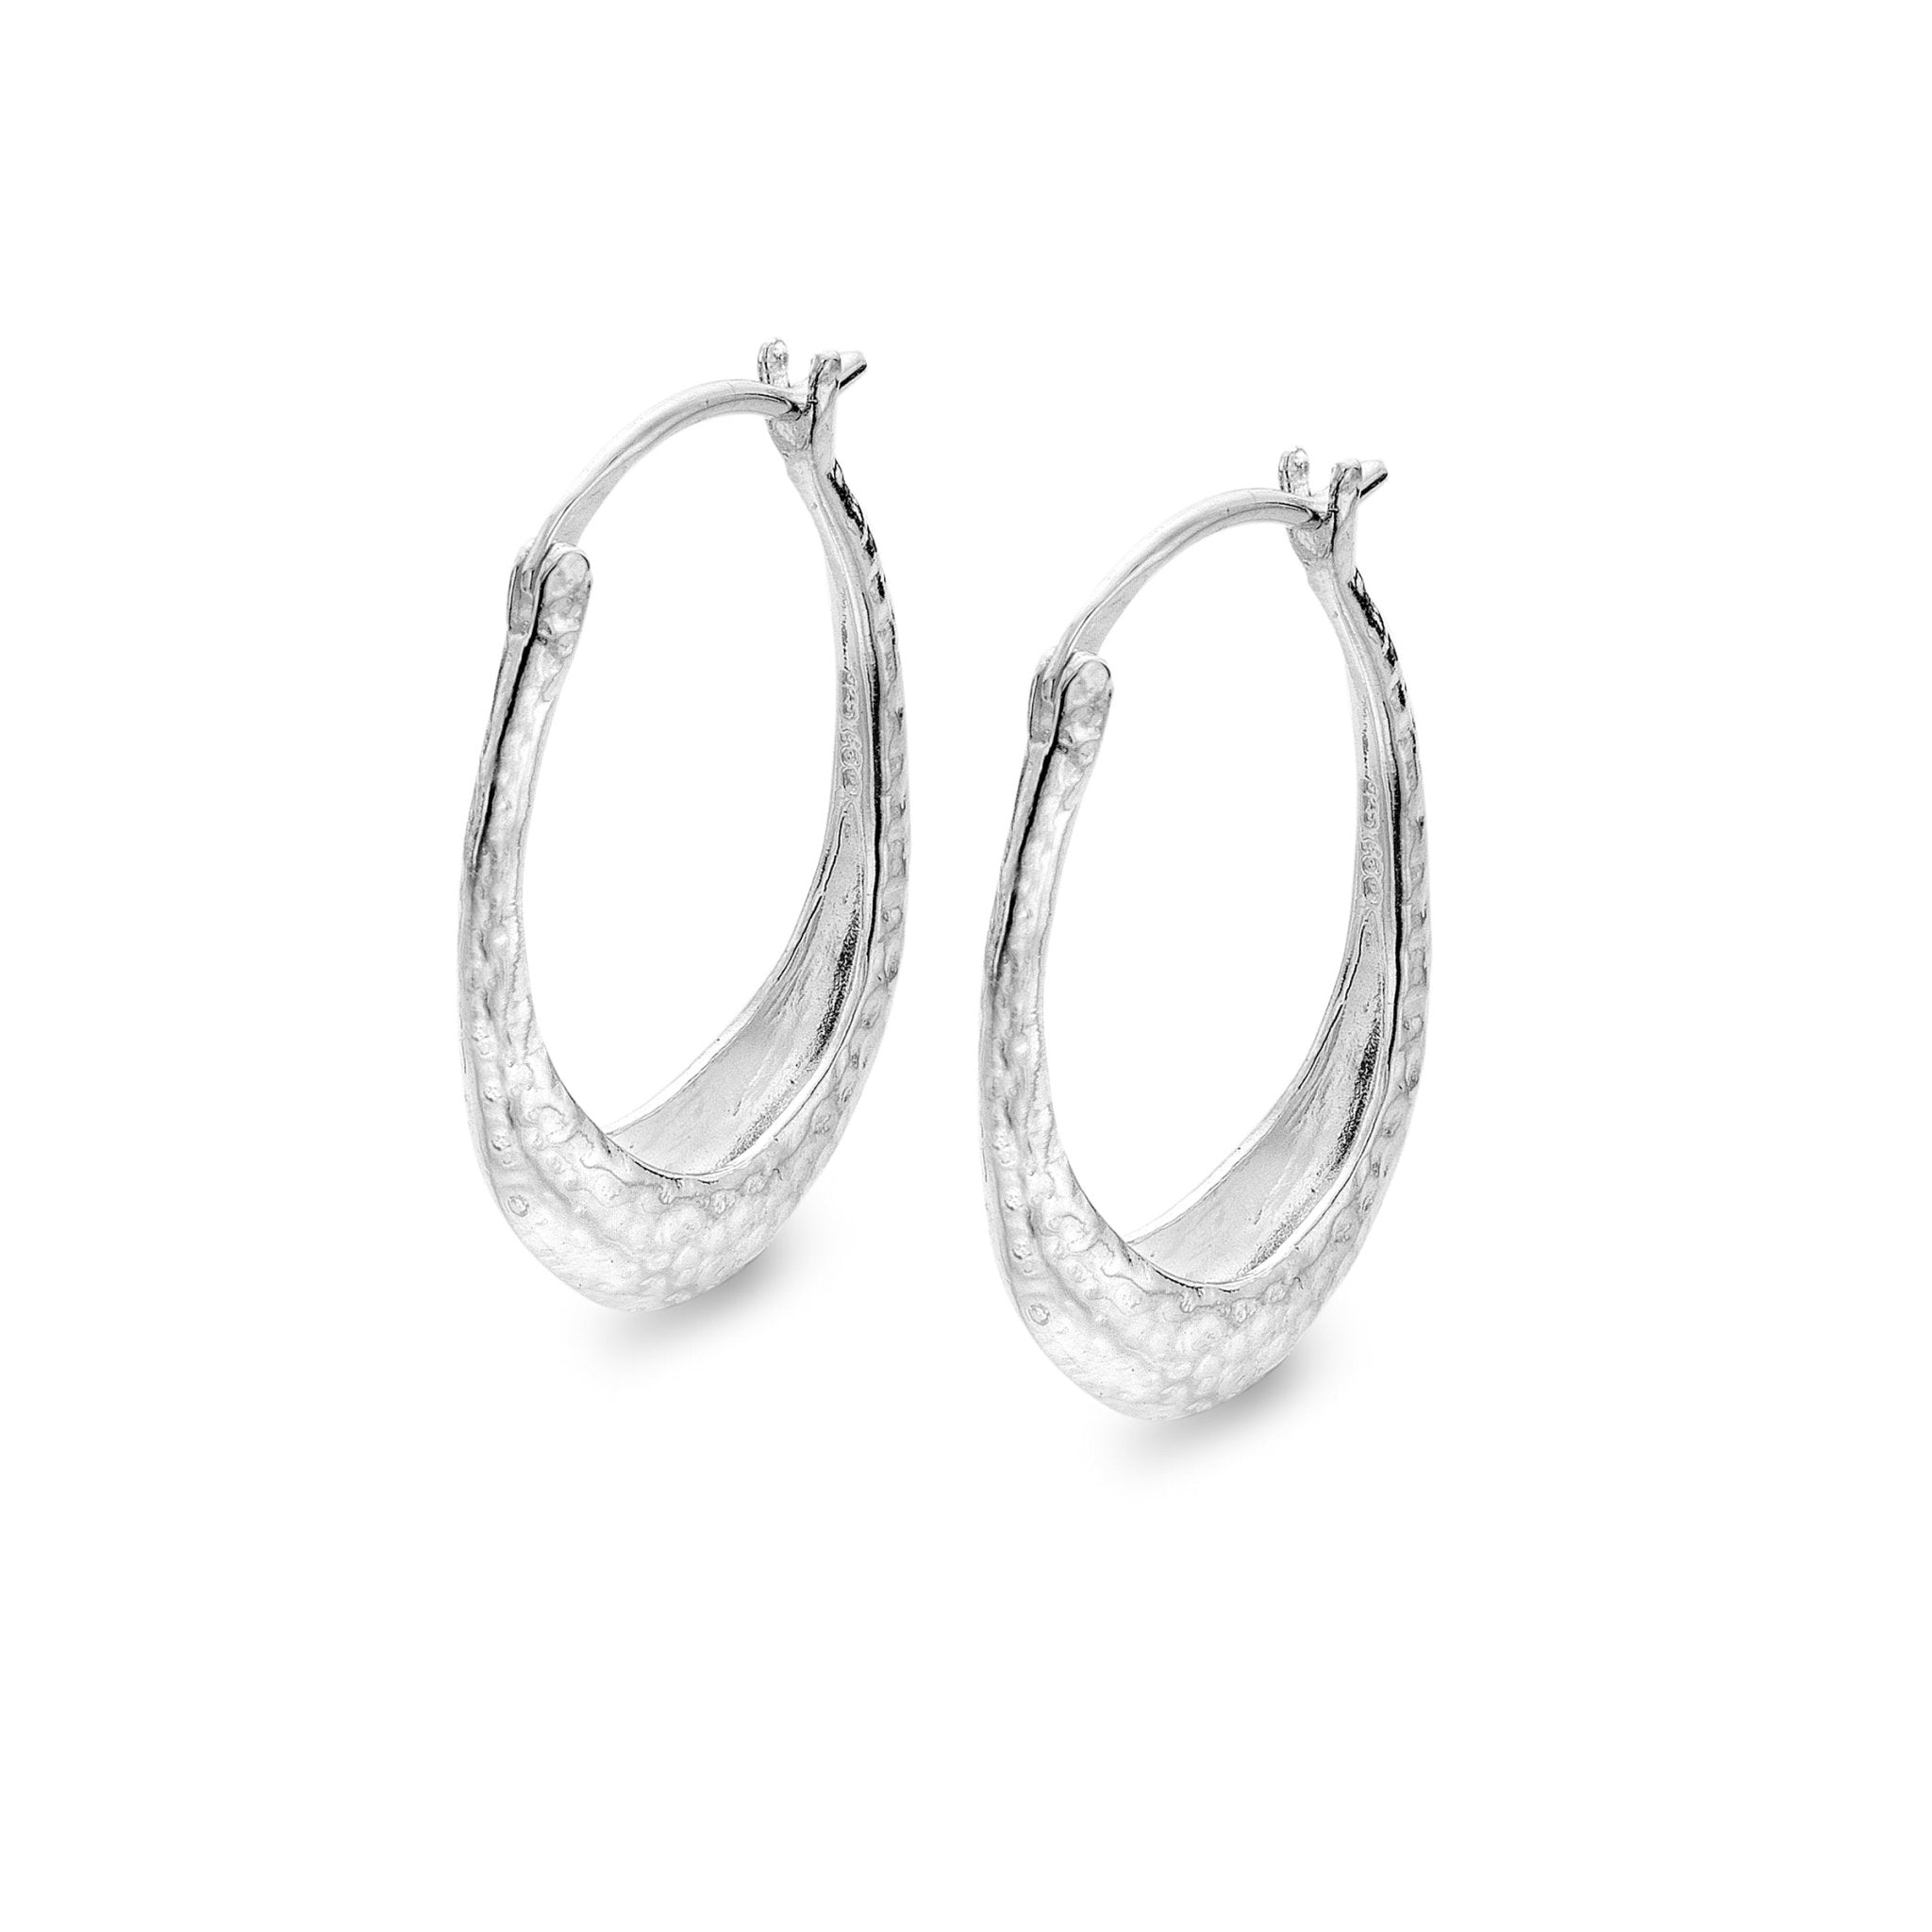 Mangly Hoops - Choice of 6 sizes. Handmade. Hammered. Oxidized Sterlin –  jNic Designs